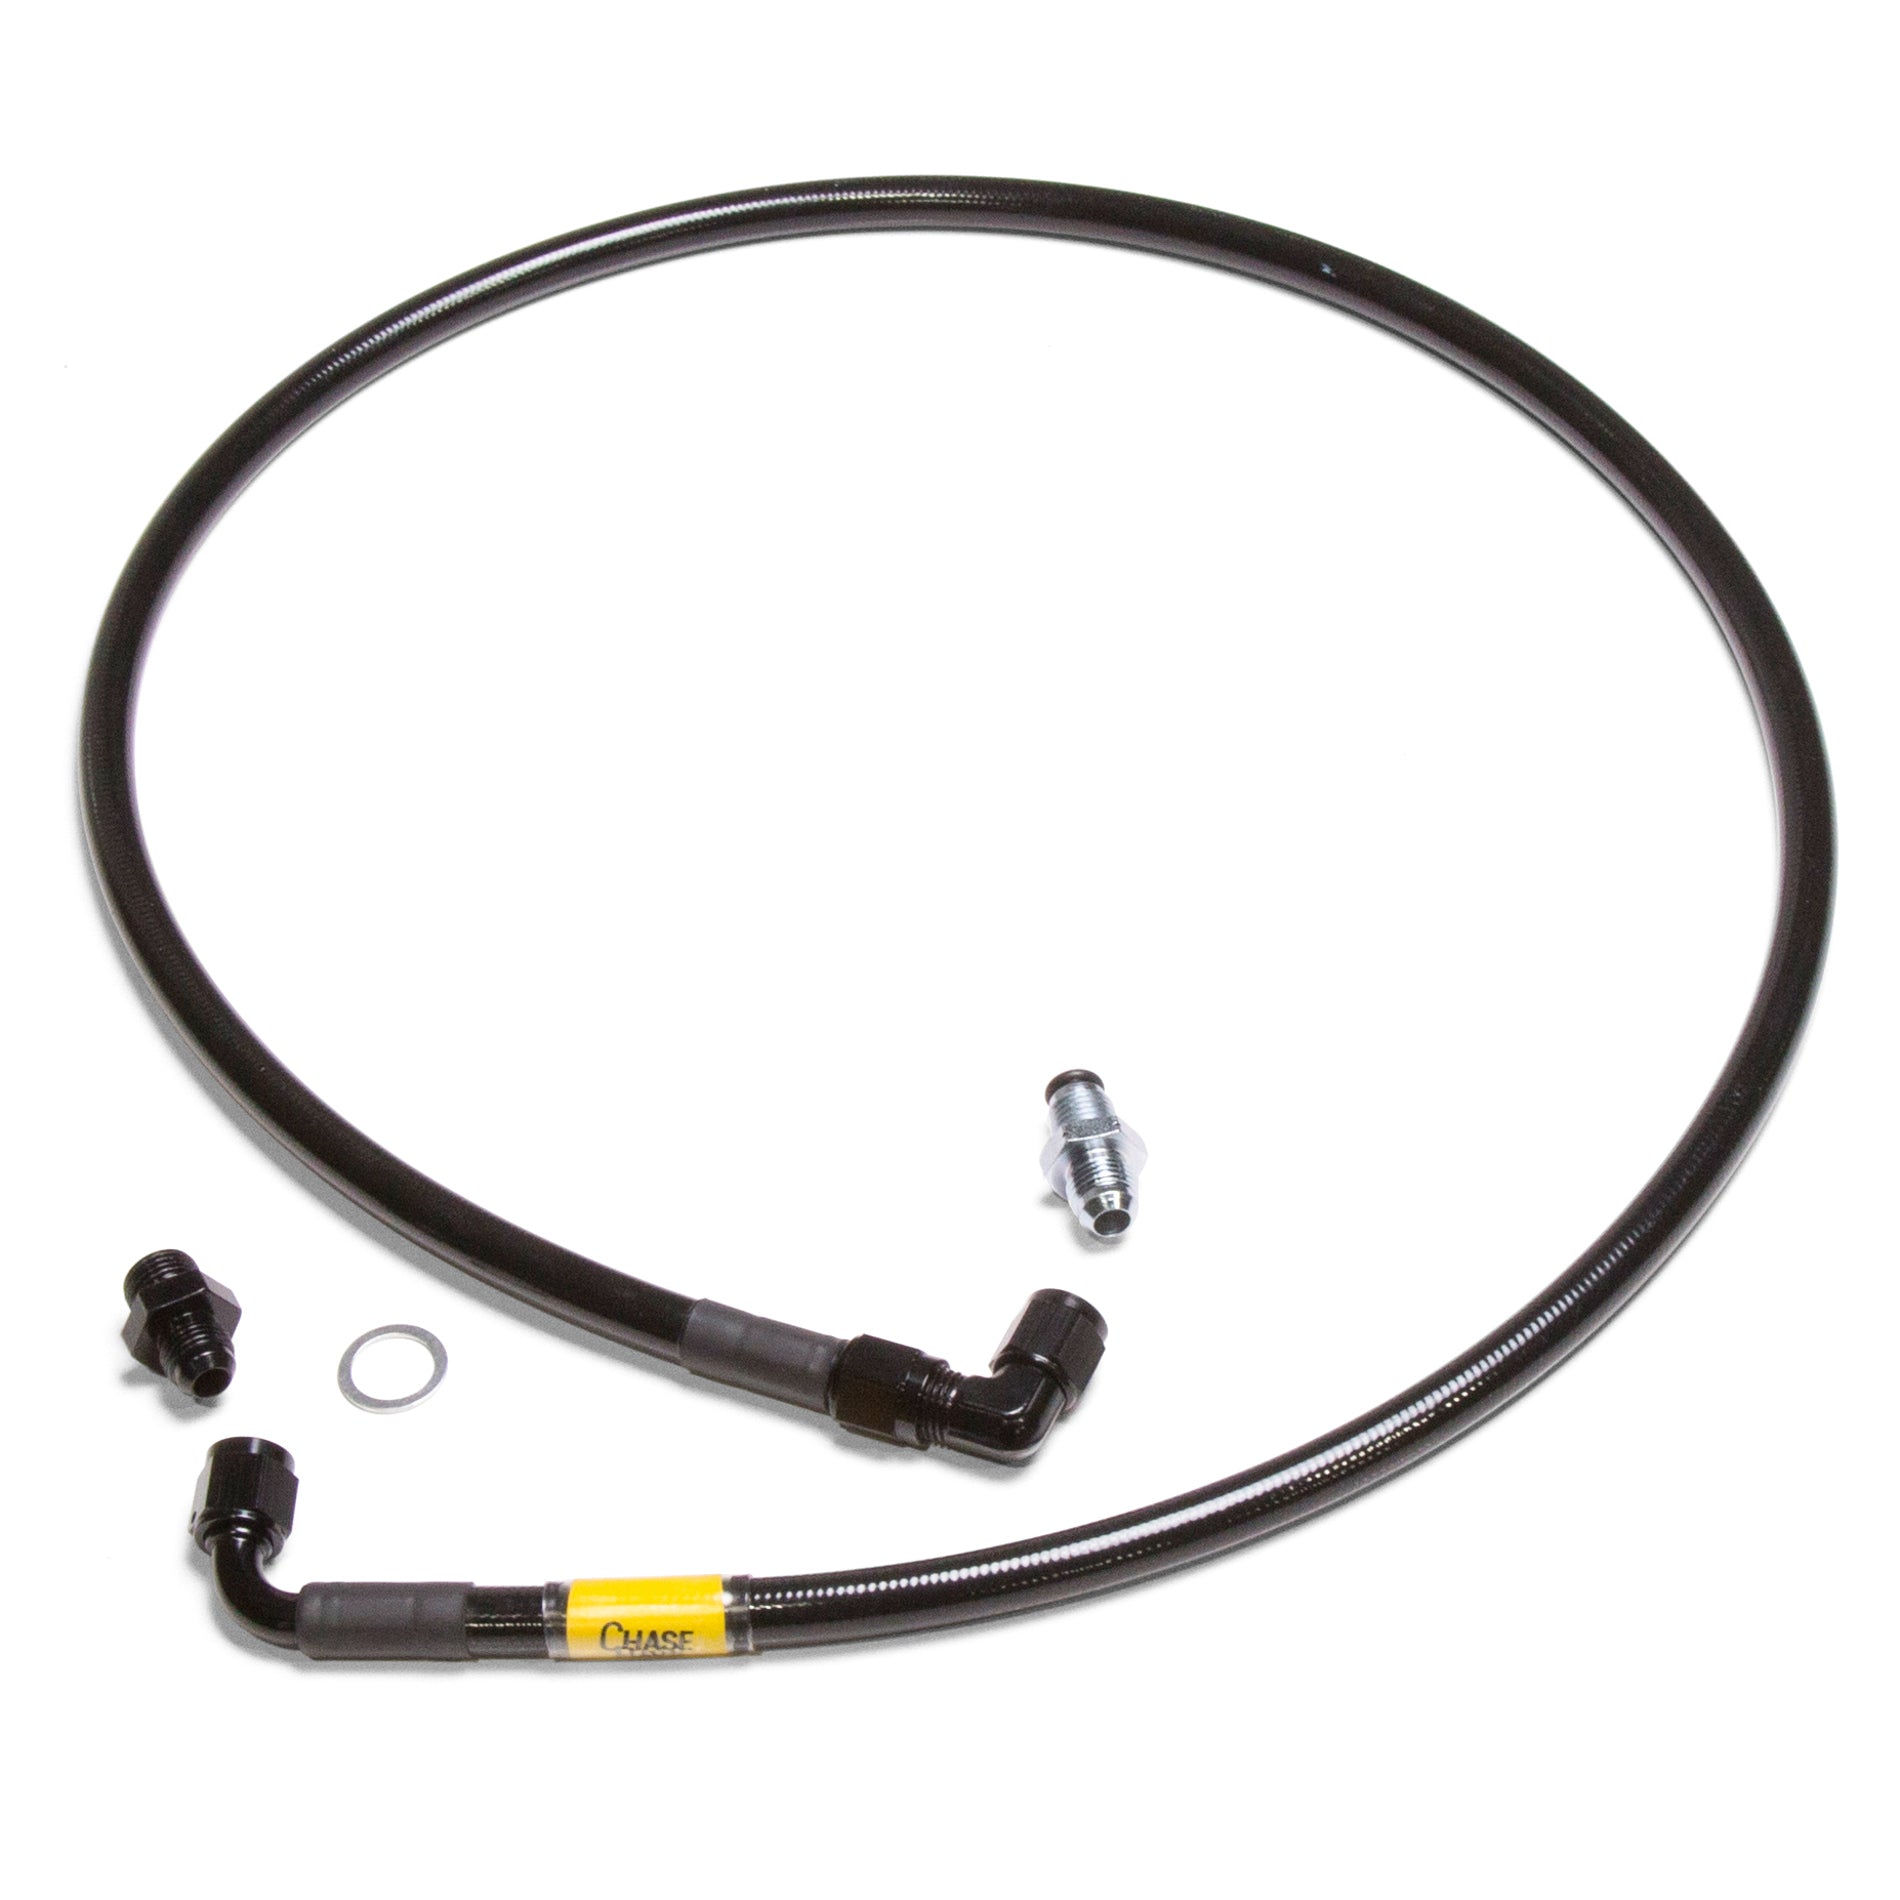 https://www.chasebays.com/cdn/shop/products/Chase_Bays_High_Pressure_Power_Steering_Hose_for_350z_G35_1_67e5ca4a-a8c6-4aa9-a910-6d89a9a14e55.jpg?v=1562969464